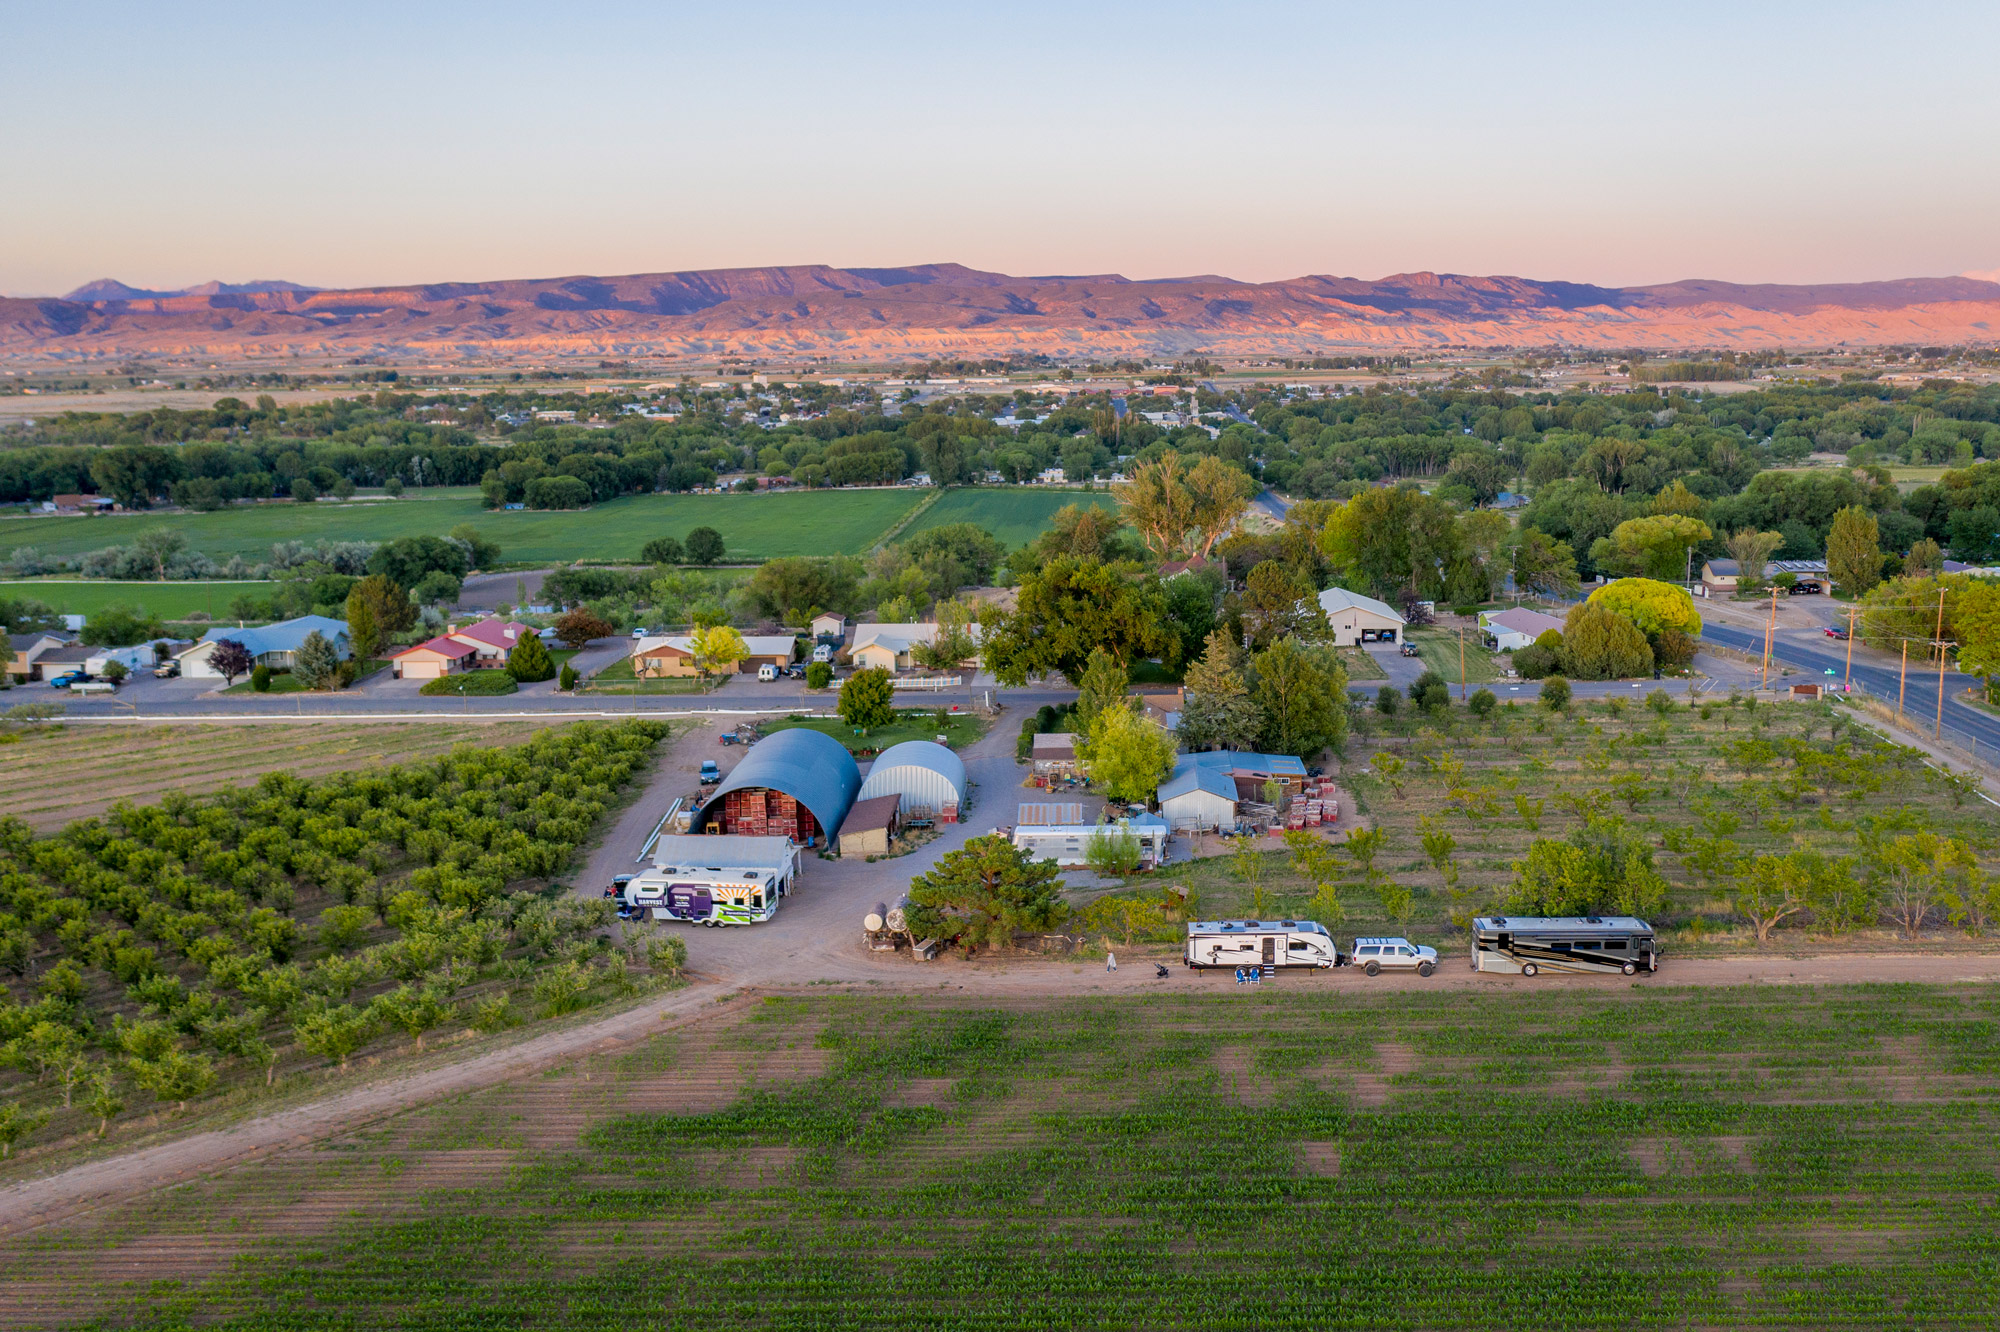 An overhead view of an RV camping at a winery in front of mountains